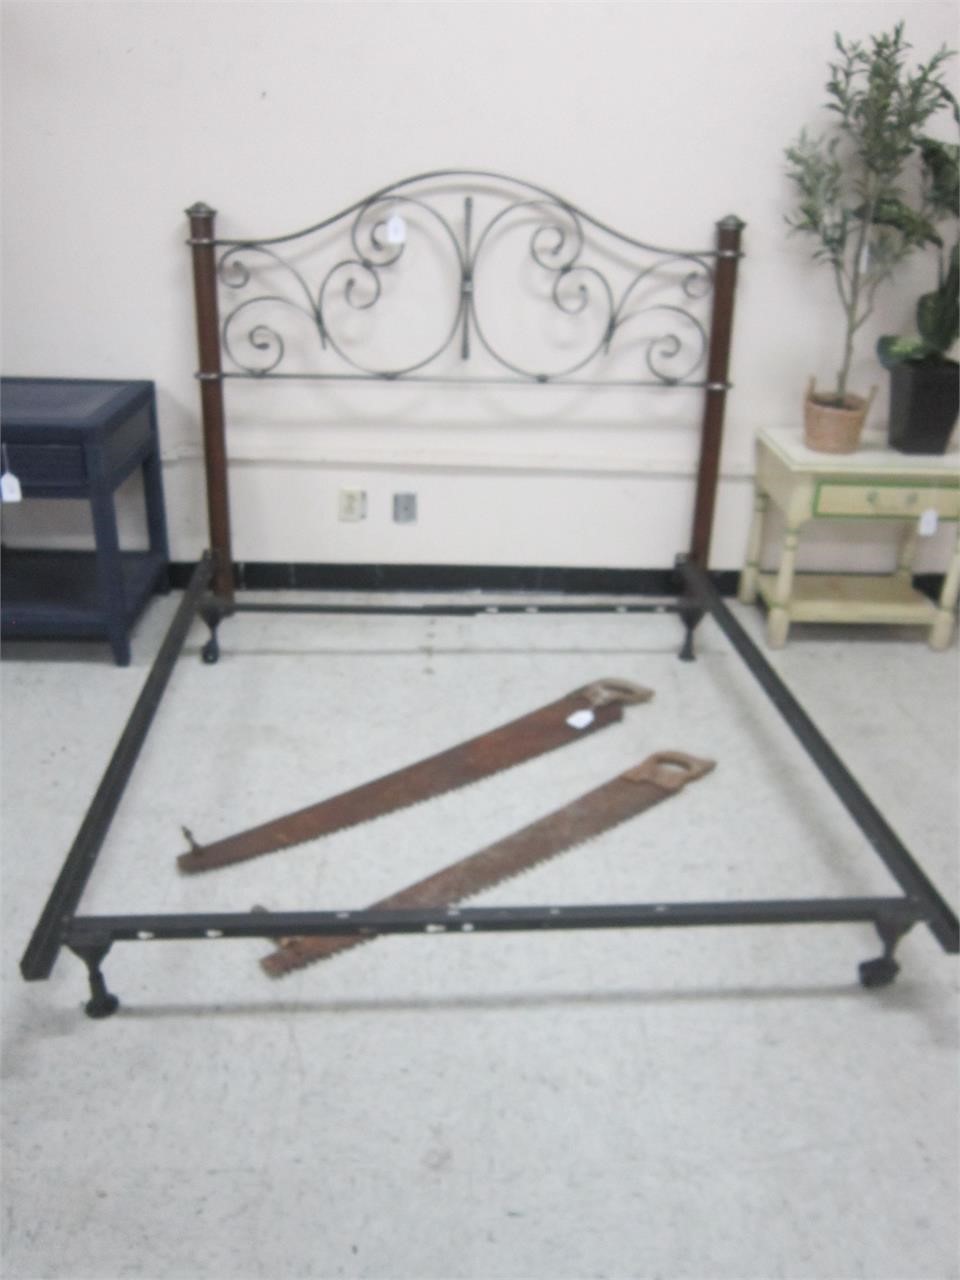 METAL QUEEN SIZE HEADBOARD AND FRAME